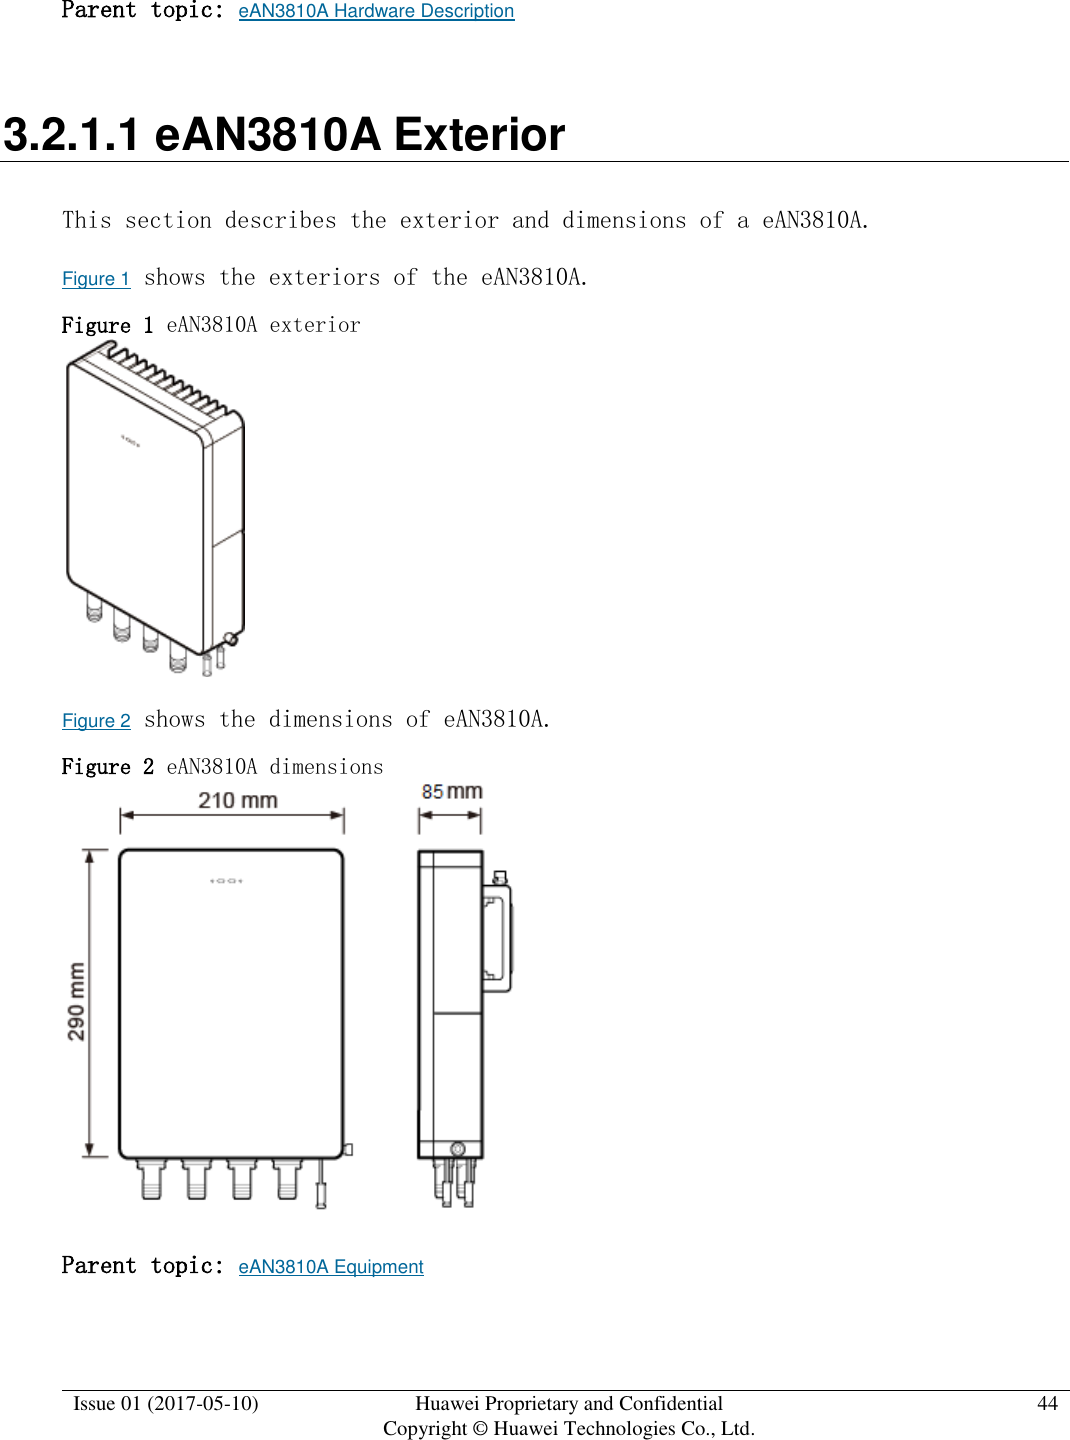  Issue 01 (2017-05-10) Huawei Proprietary and Confidential      Copyright © Huawei Technologies Co., Ltd. 44  Parent topic: eAN3810A Hardware Description 3.2.1.1 eAN3810A Exterior This section describes the exterior and dimensions of a eAN3810A. Figure 1 shows the exteriors of the eAN3810A. Figure 1 eAN3810A exterior   Figure 2 shows the dimensions of eAN3810A. Figure 2 eAN3810A dimensions   Parent topic: eAN3810A Equipment 